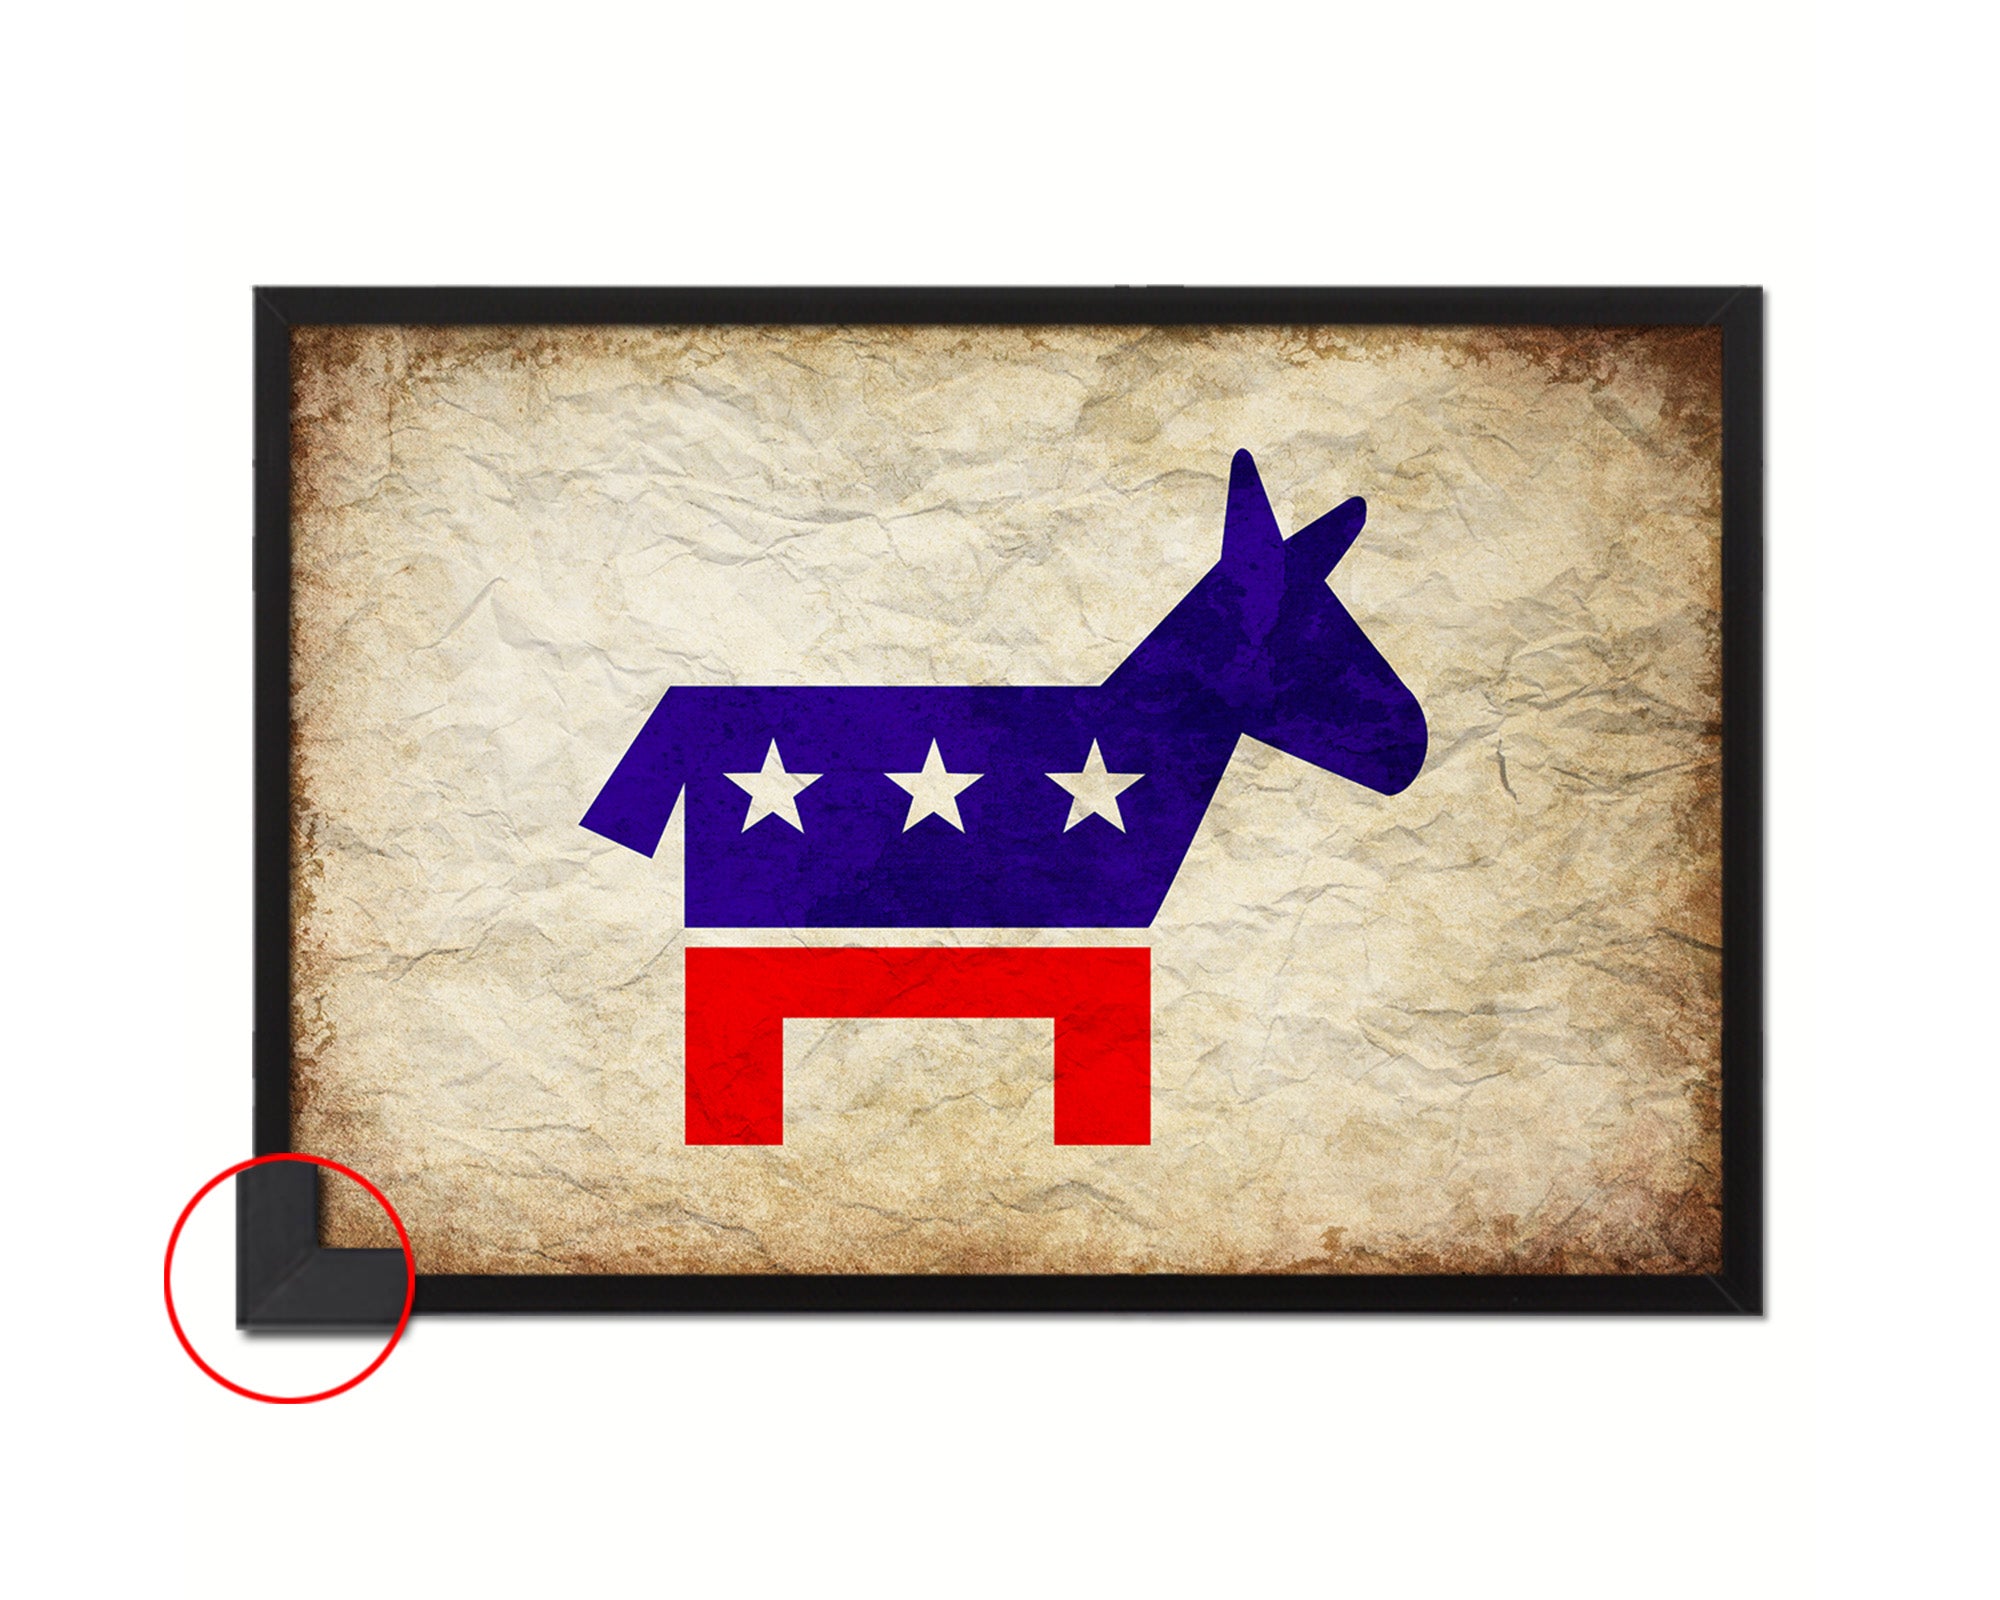 Democratic Party Political Democrat Vintage Military Flag Framed Print Sign Decor Wall Art Gifts